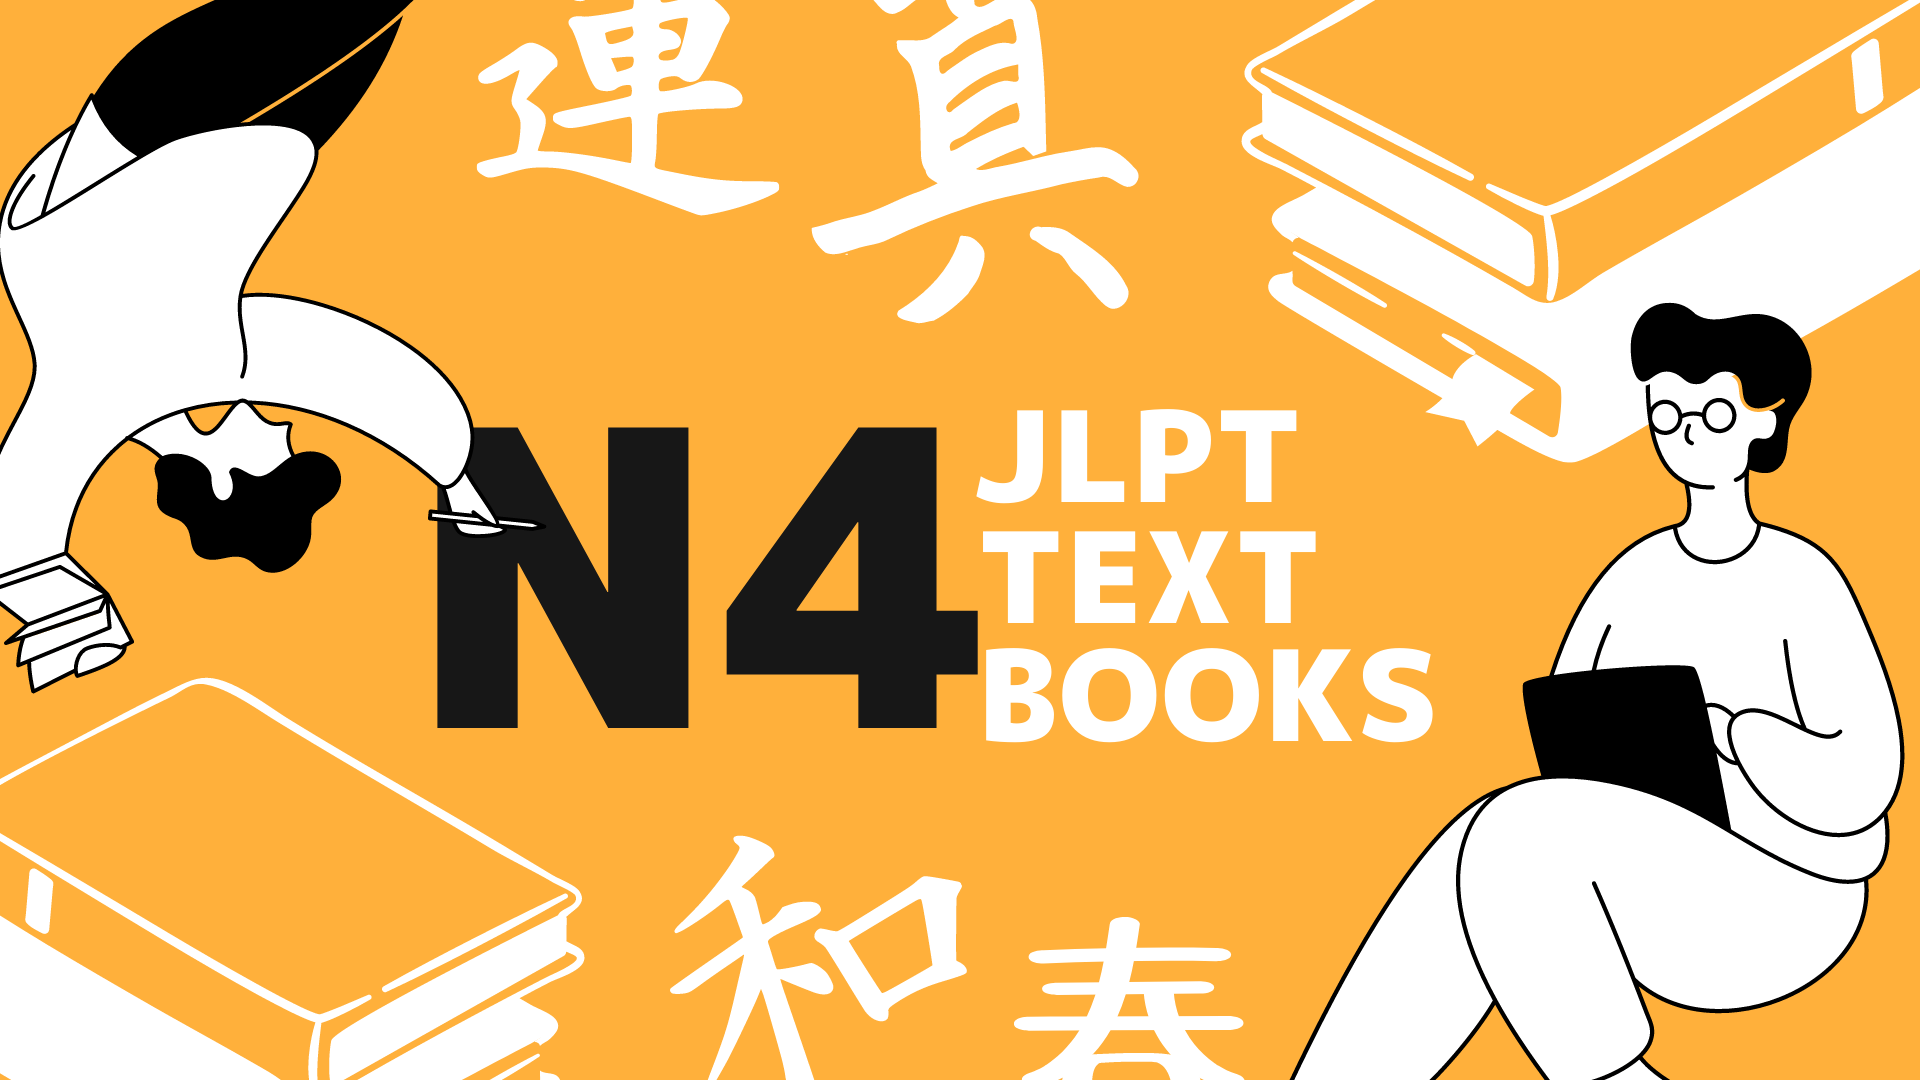 40 Best Japanese Learning Books for Beginners, JLPT Study and More